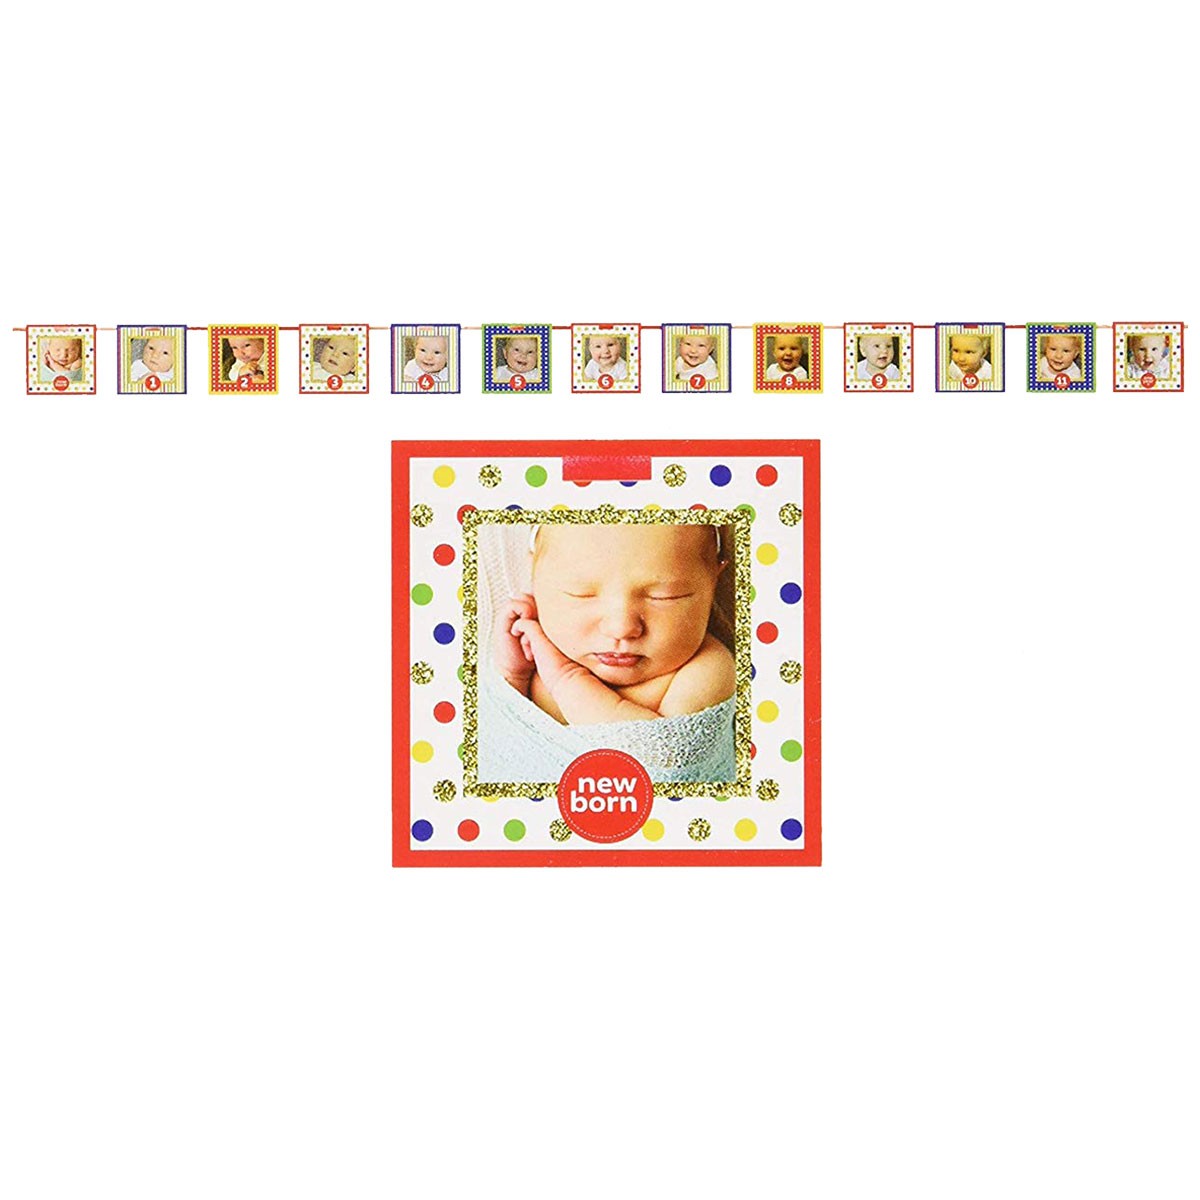 Load image into Gallery viewer, Circus Party Photo Banner. Great way to share photo memories of your child up to the 1st birthday.
